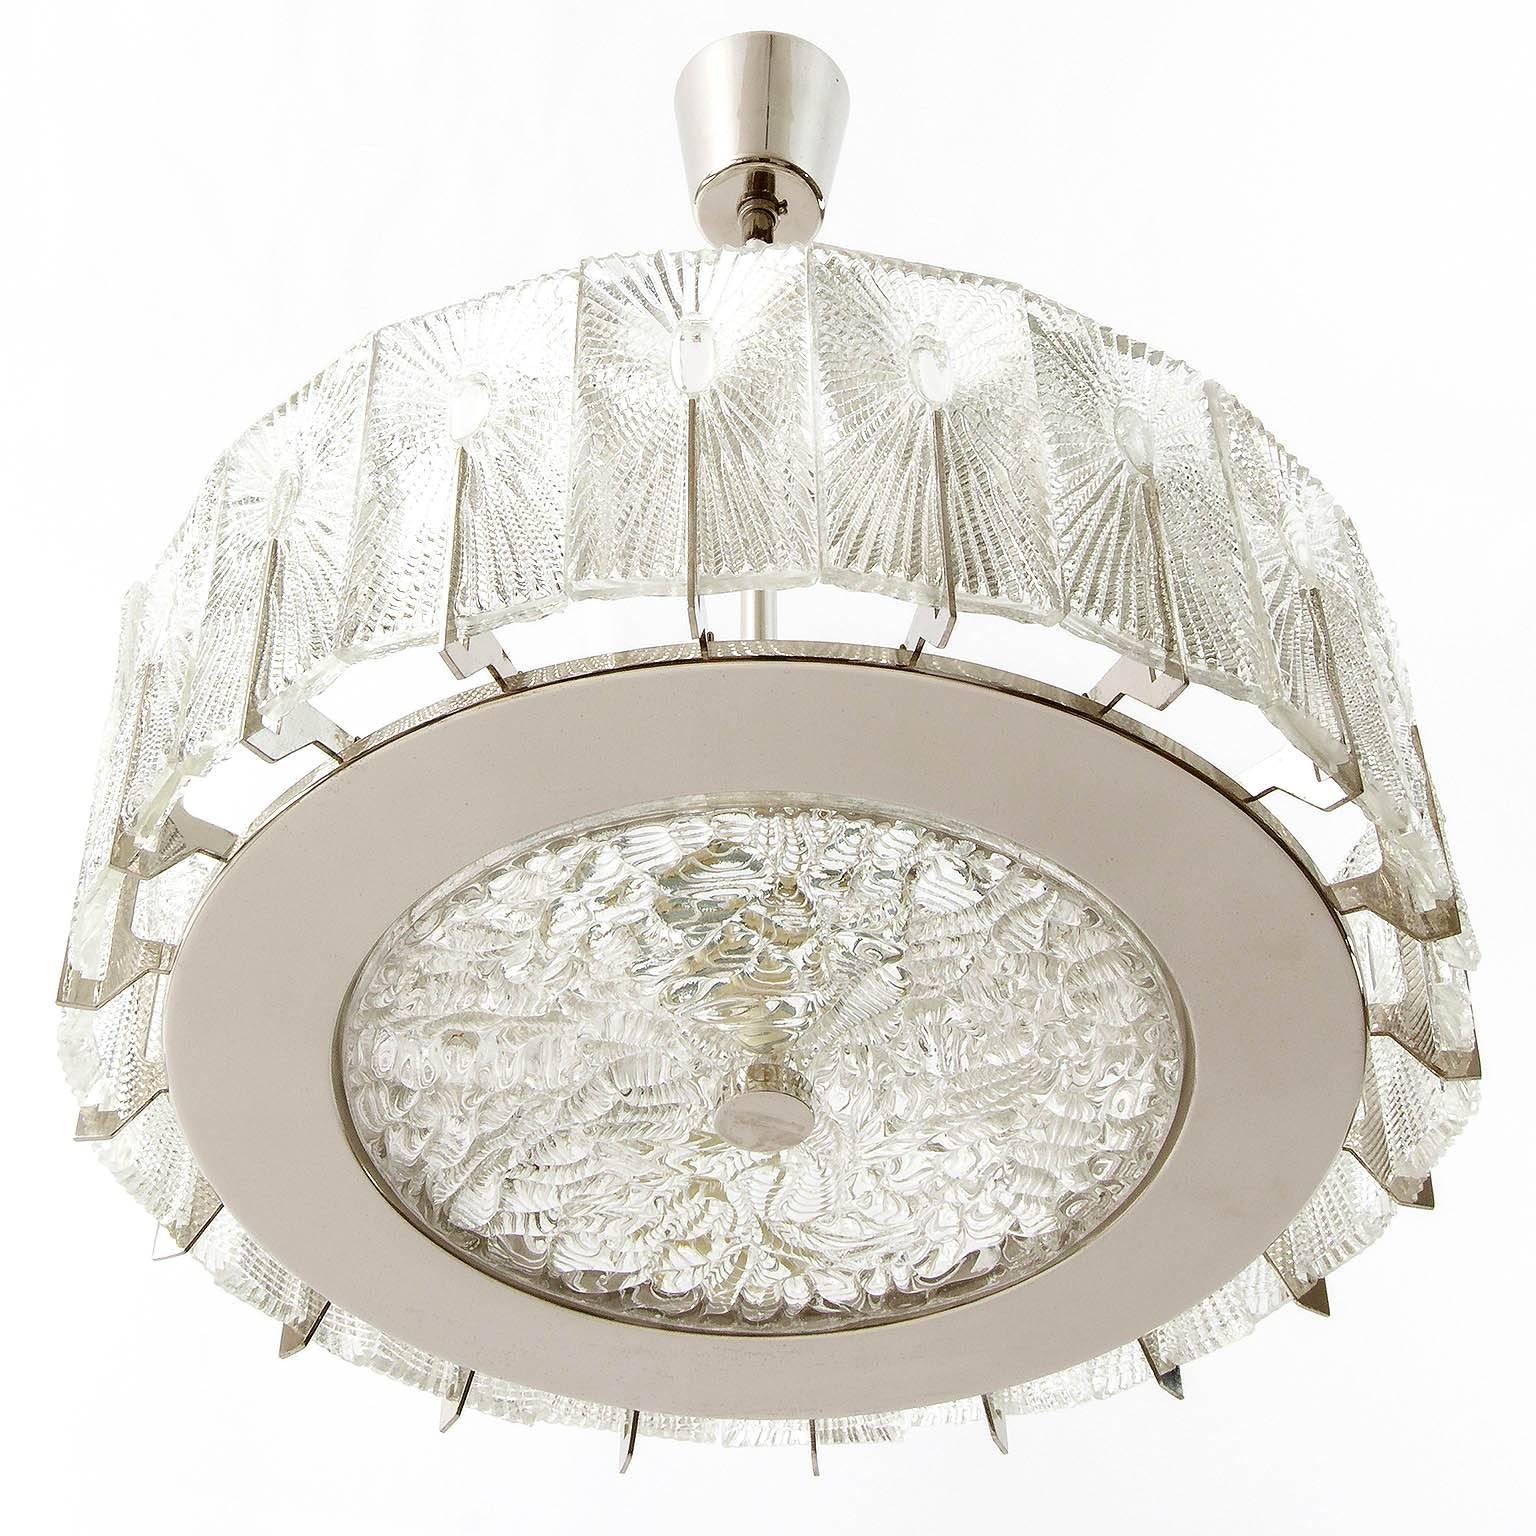 Enameled Pair of Chandeliers or Flush Mount Lights by Rupert Nikoll, Glass Nickel, 1950s